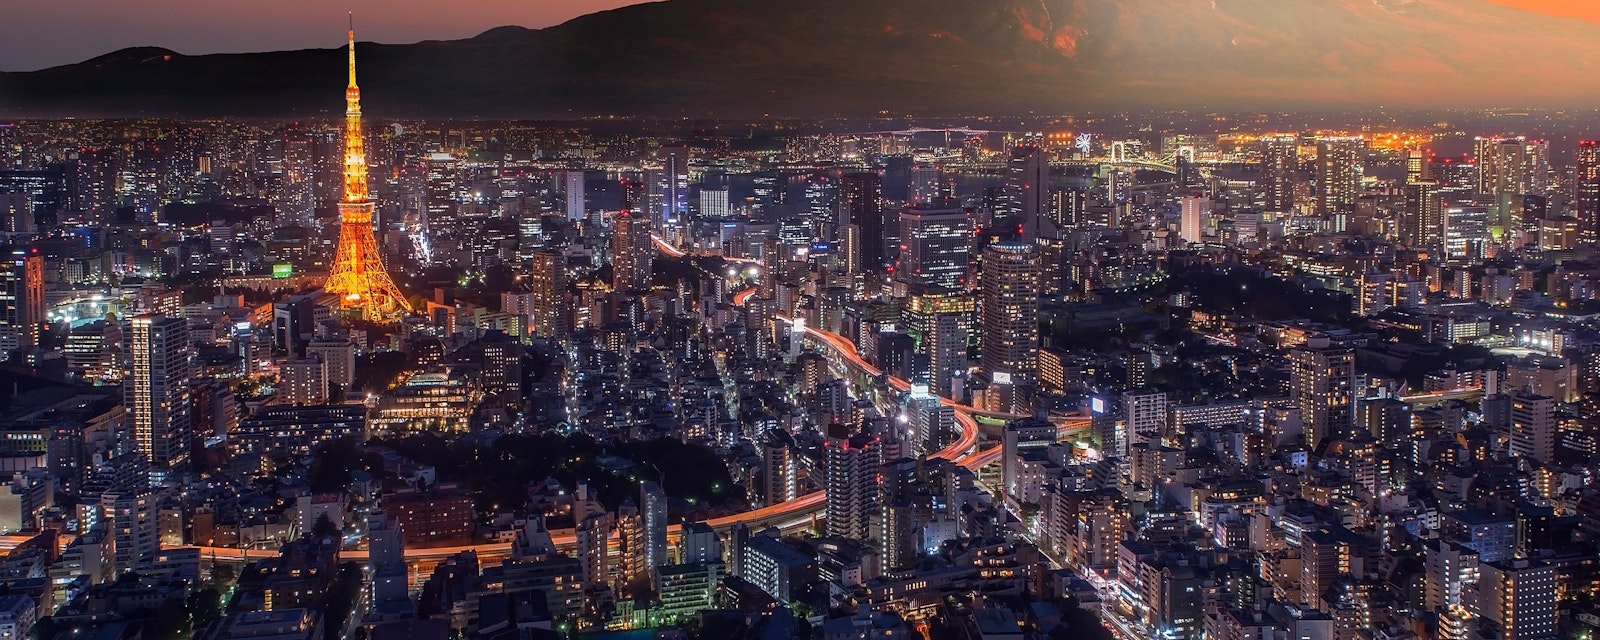 Retouch,Photo,Of,Tokyo,City,At,Twilight,With,Mt,Fuji